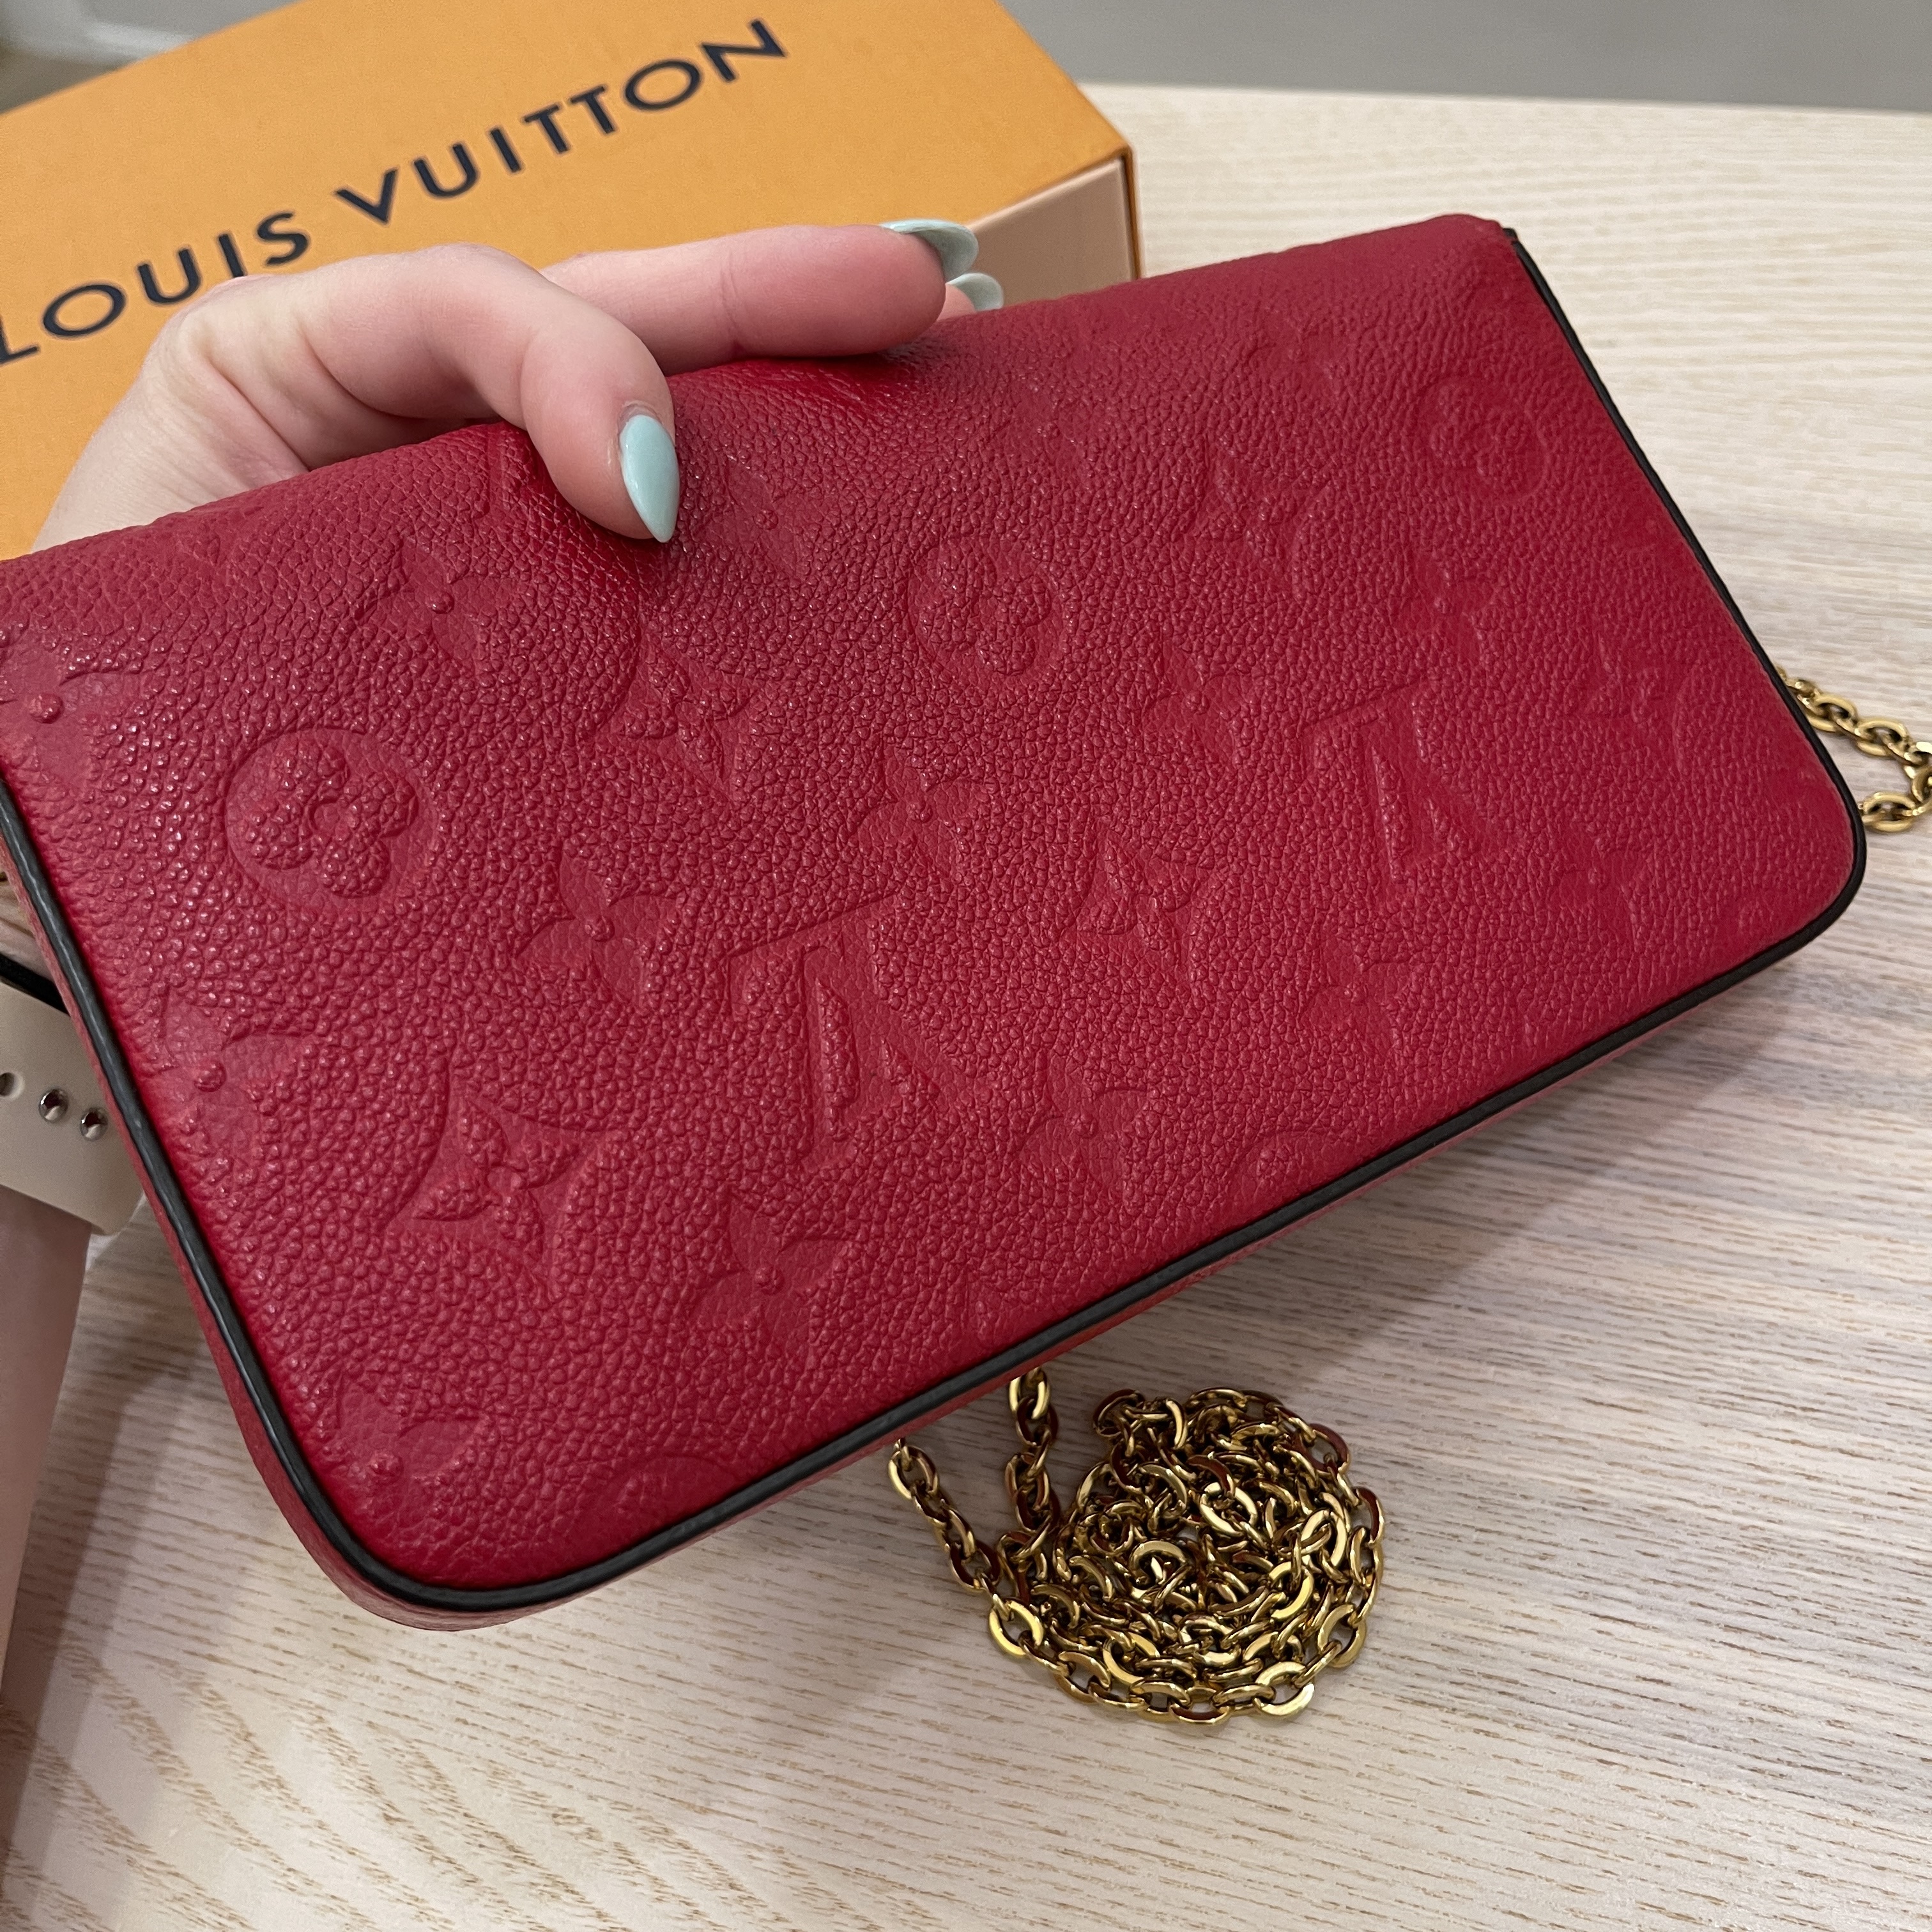 Review of the Louis Vuitton Double Zip Pochette in Marine Rouge 